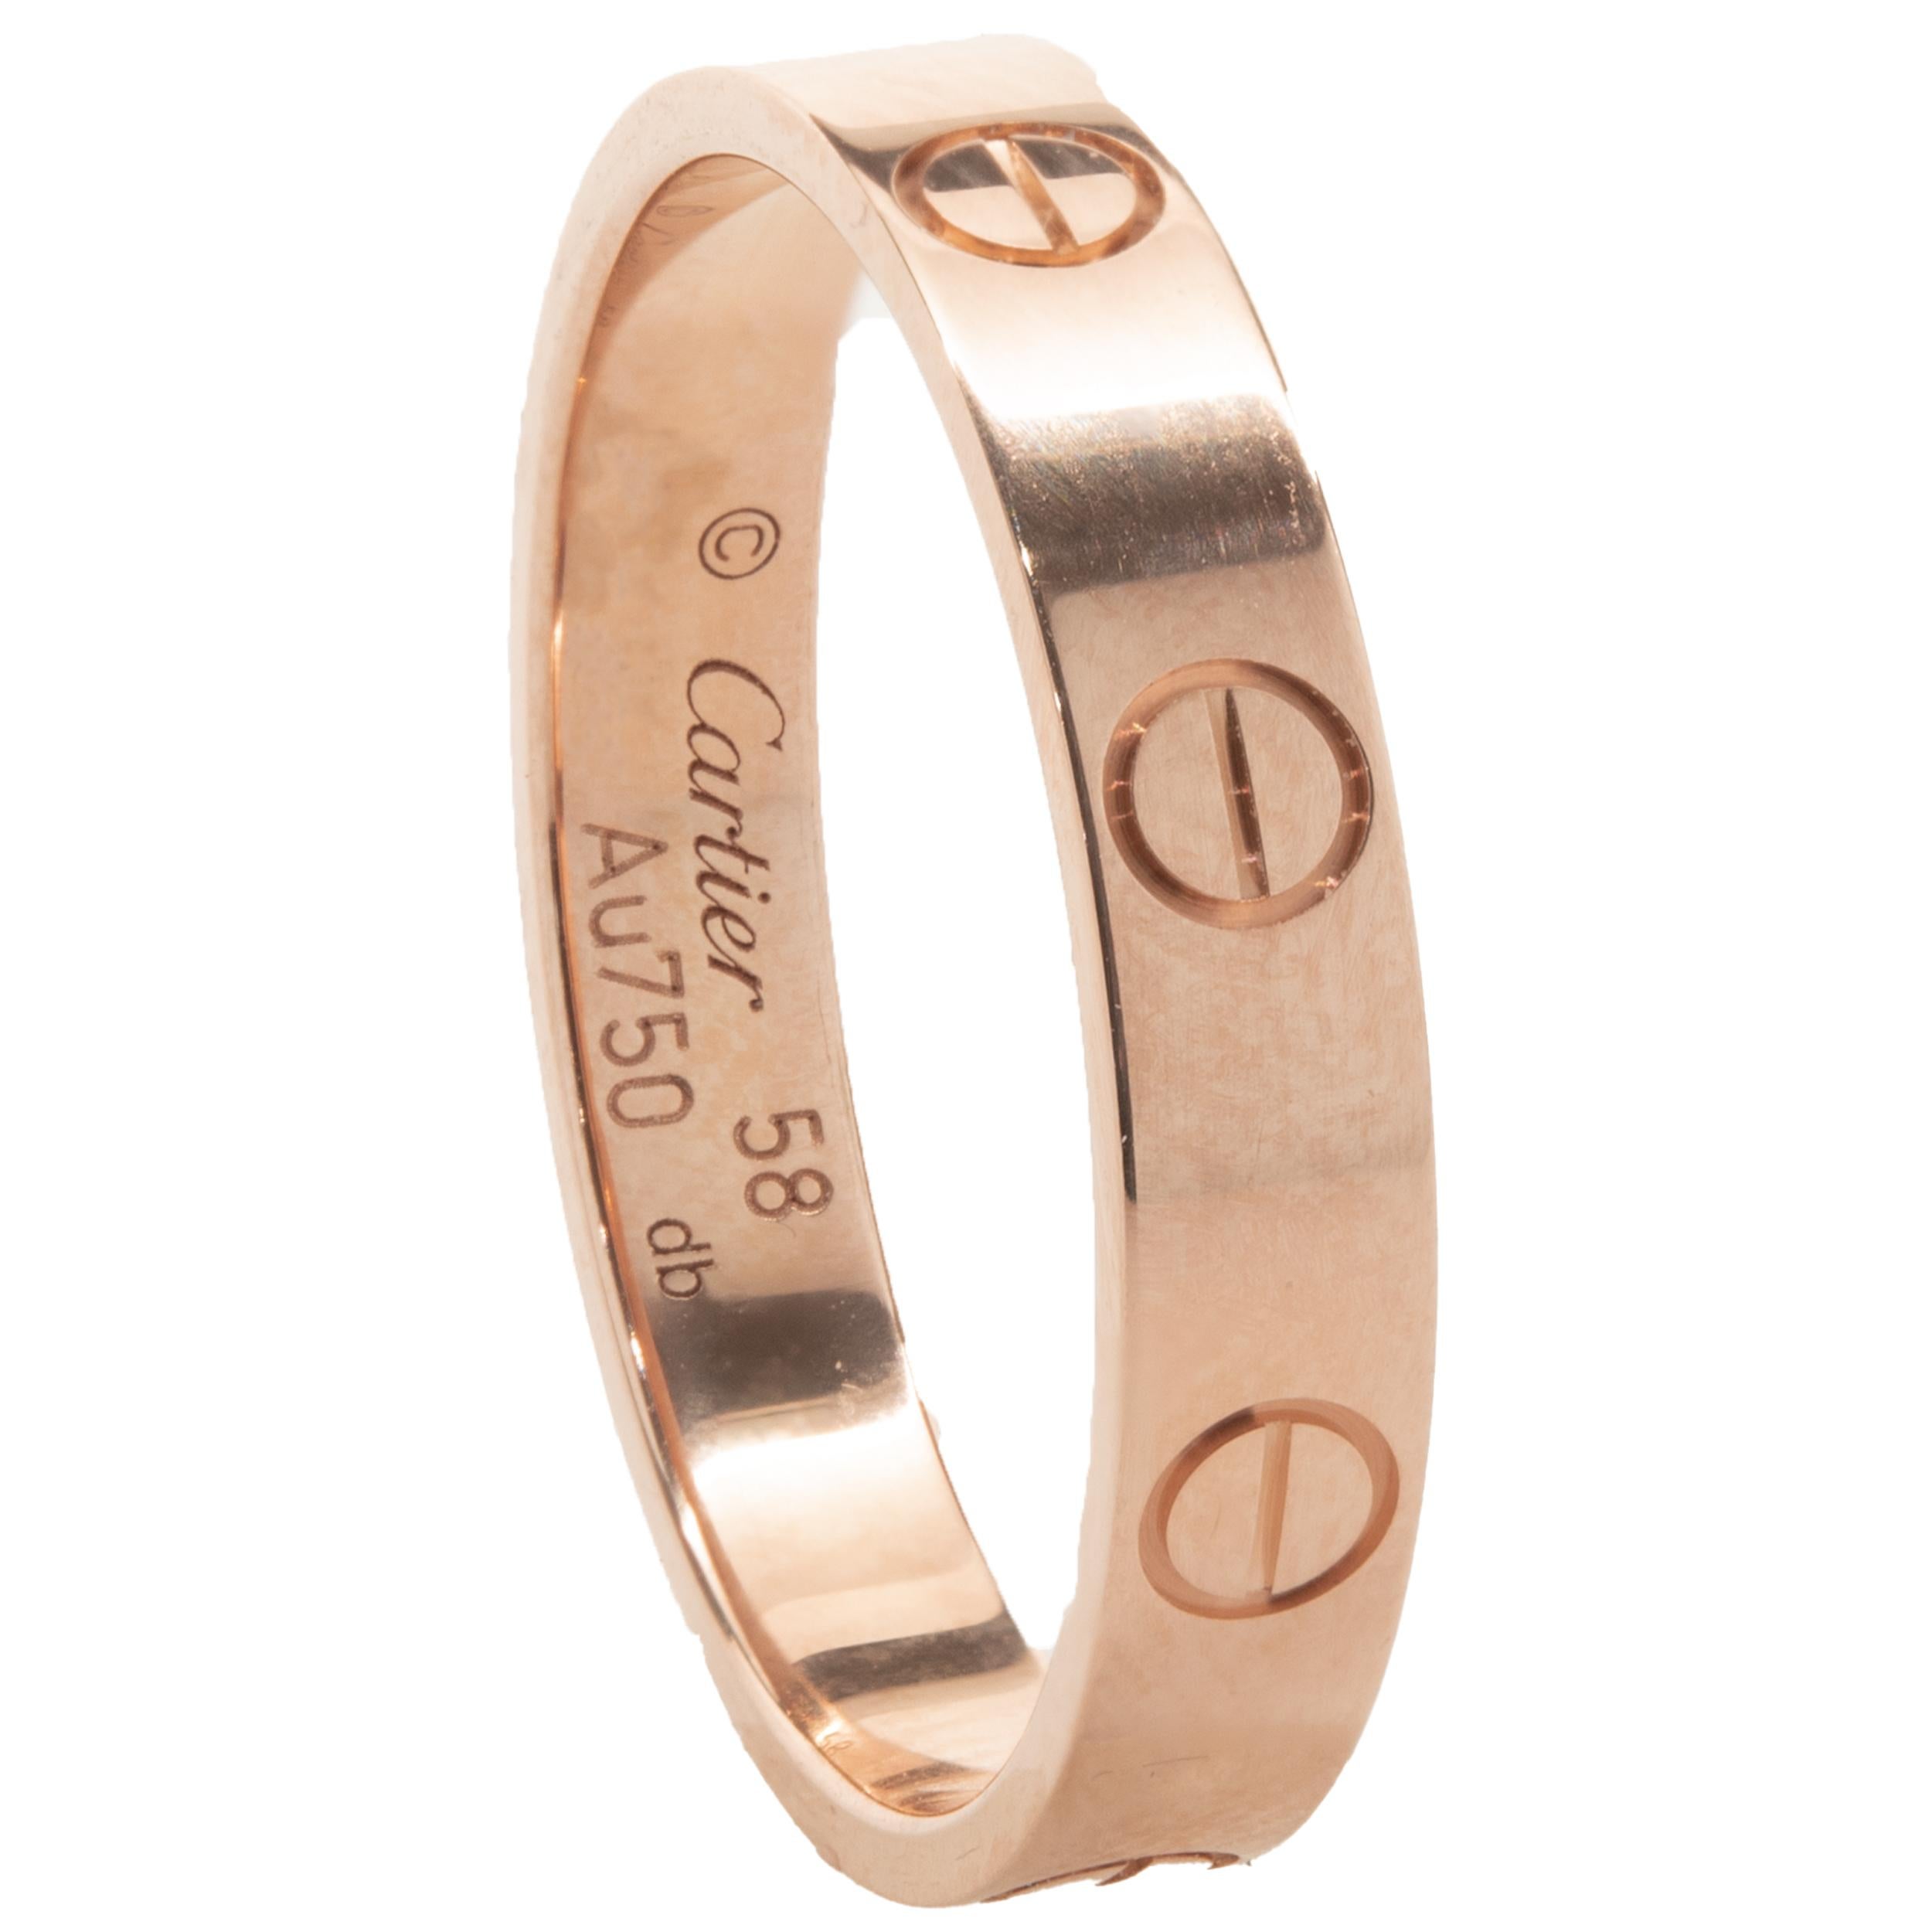 Designer: Cartier
Material: 18K rose gold
Dimensions: ring top measures 3.7mm wide
Weight: 3.69 grams
Size: 58 (8.25 US)
Serial # PVUXXX

Complete with original box and papers
Guaranteed authentic by seller 